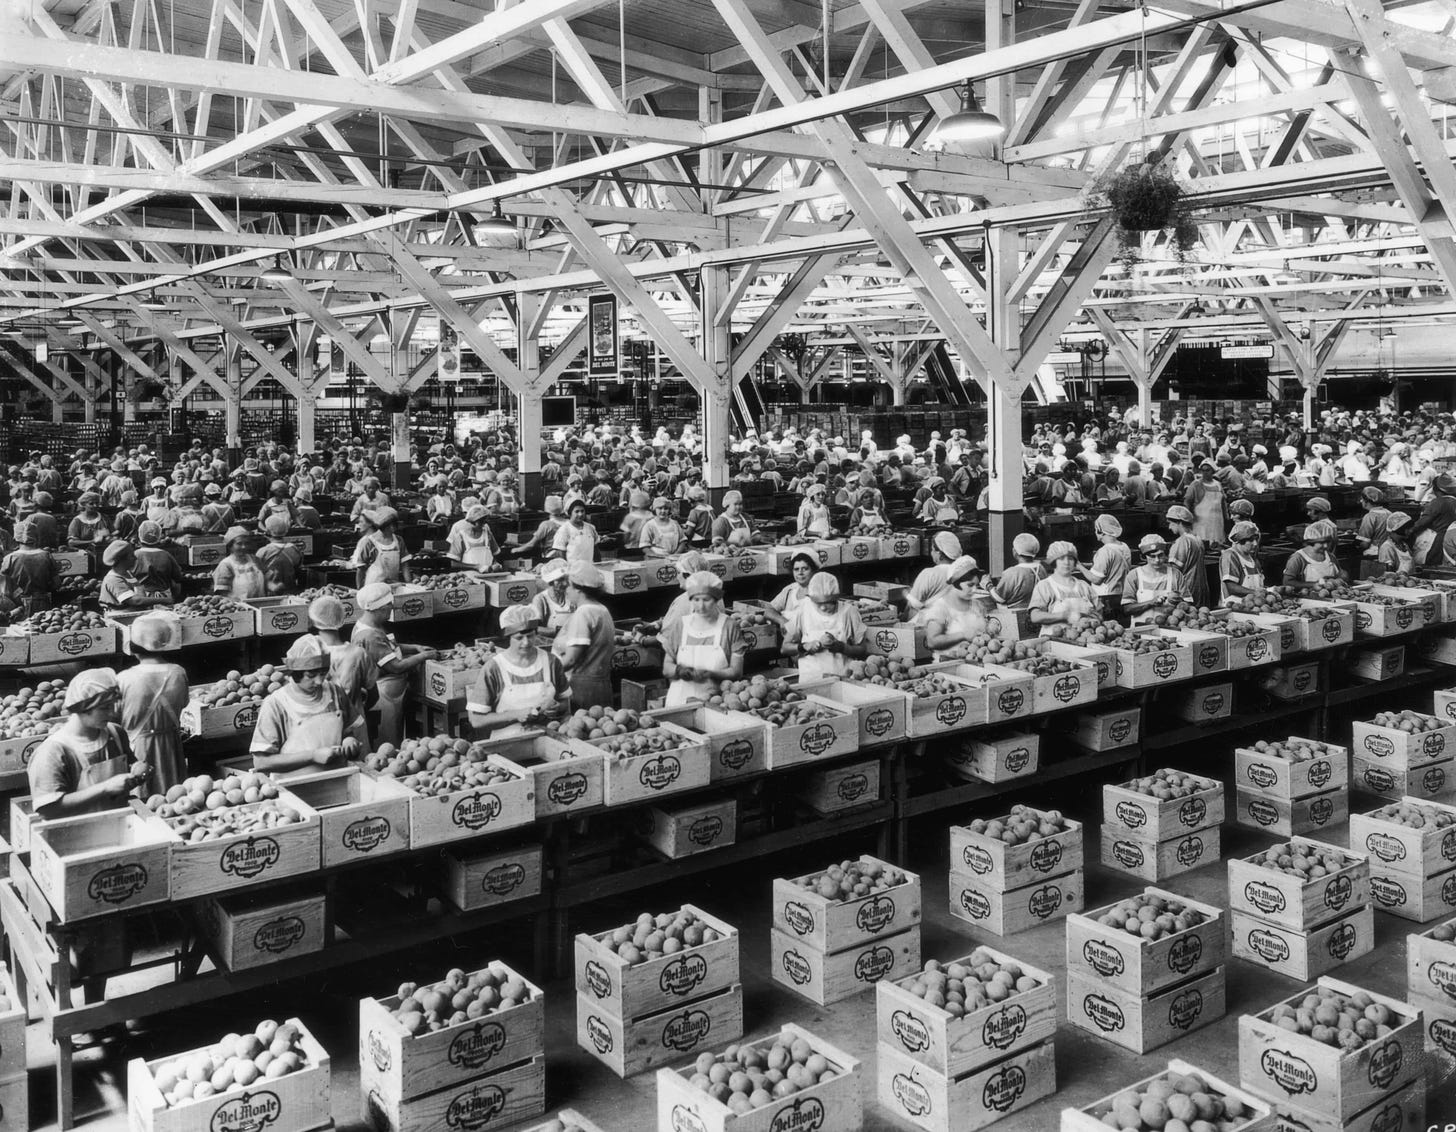 The Foods That Built America: How Heinz, Kellogg's, Coca-Cola and Hershey's  owe their existence to terrible wars | MEAWW